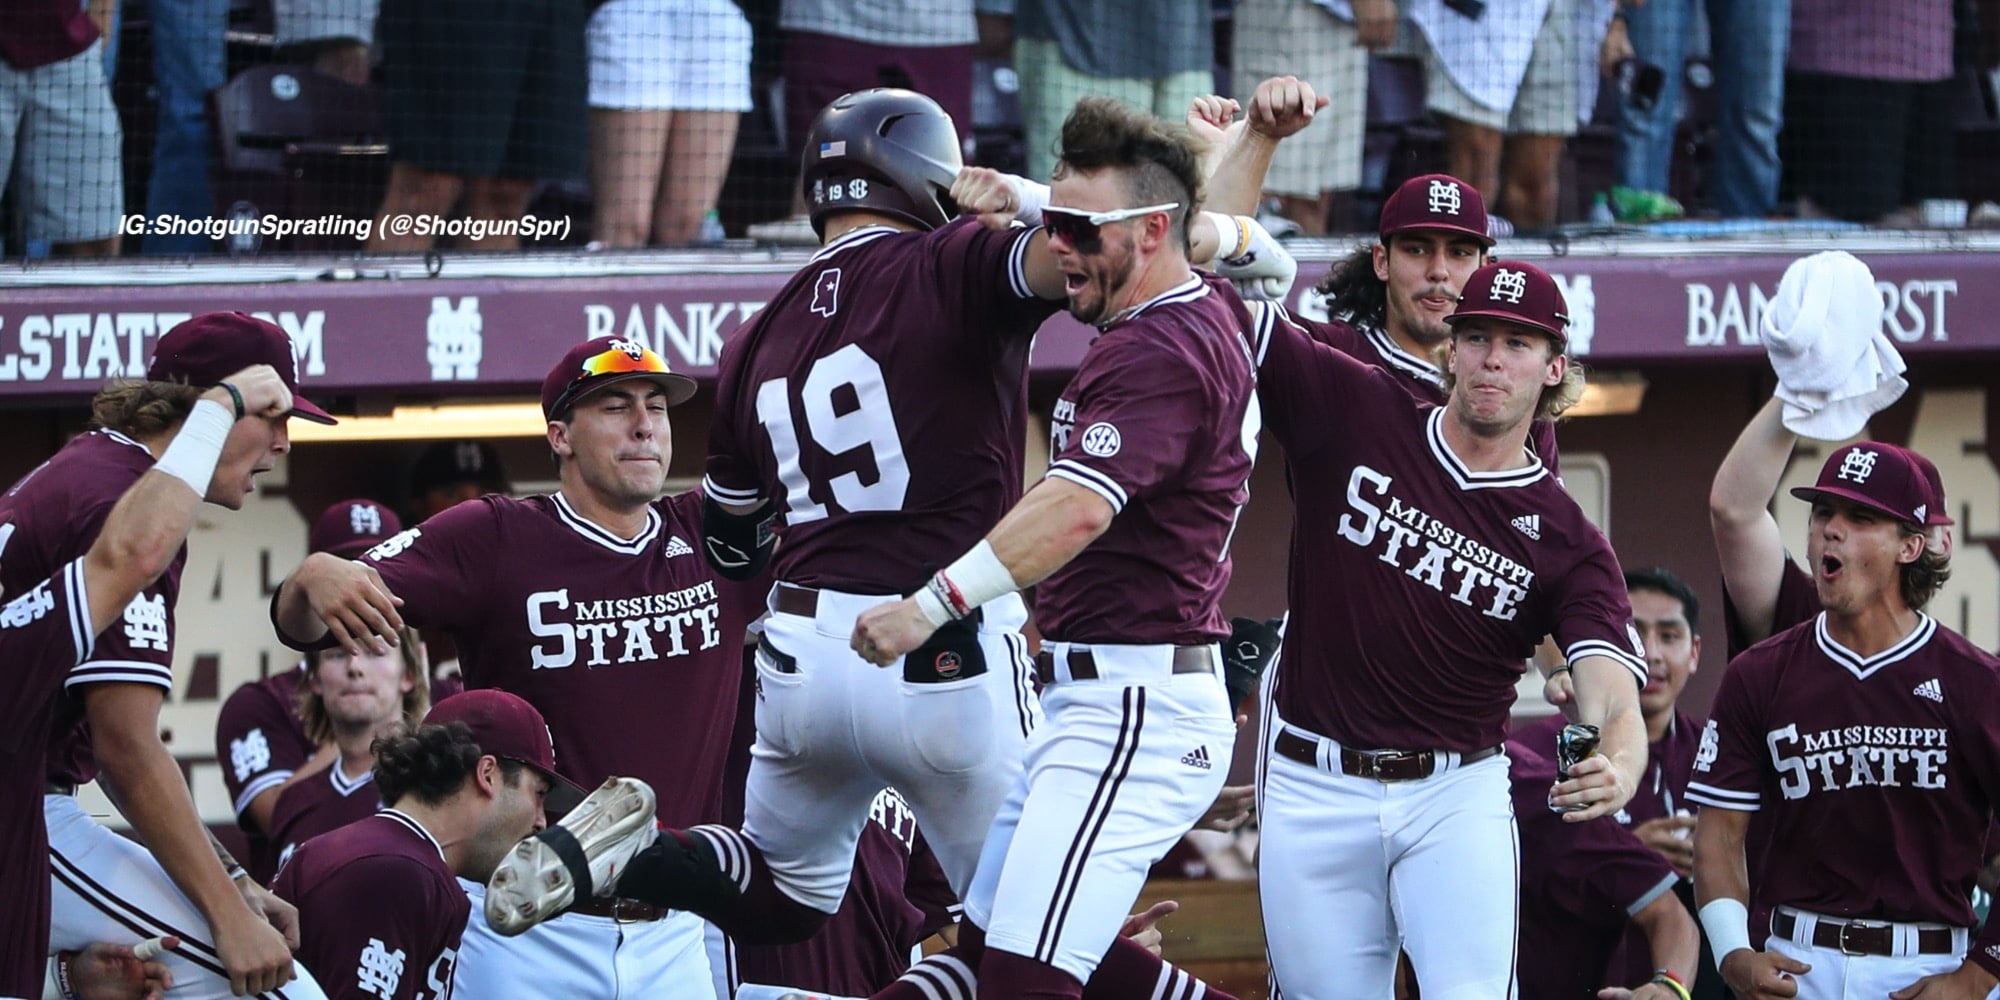 OMA-DAWGS! Mississippi State Punches Their Ticket to the College